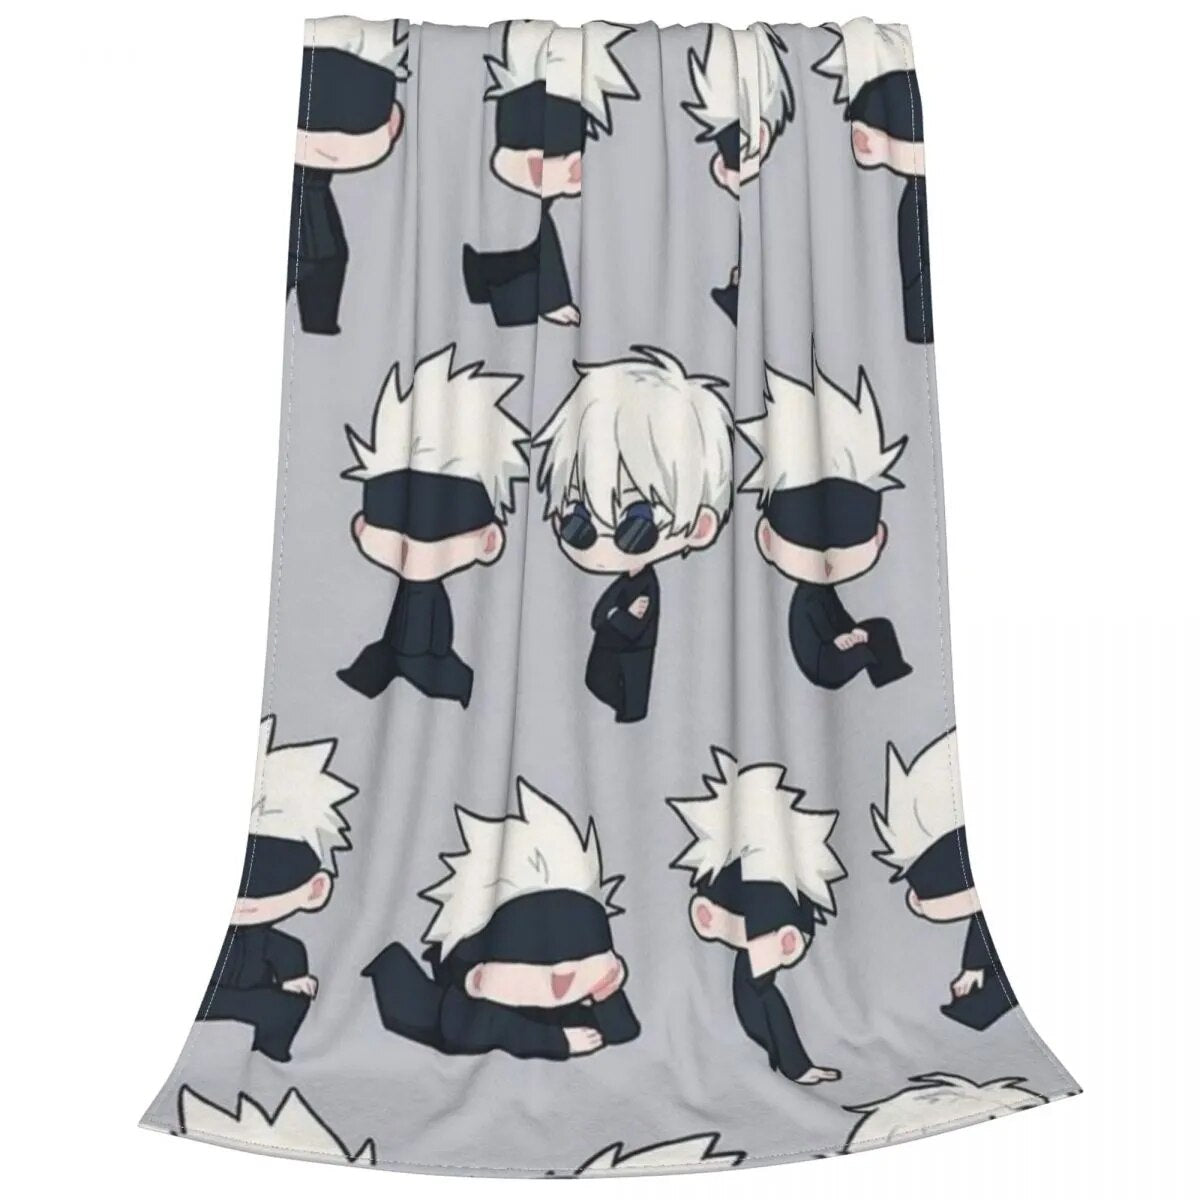 The design reflects the essence of the series. Experience the power of snuggle. If you are looking for more Jujutsu Kaisen Merch,We have it all!| Check out all our Anime Merch now!